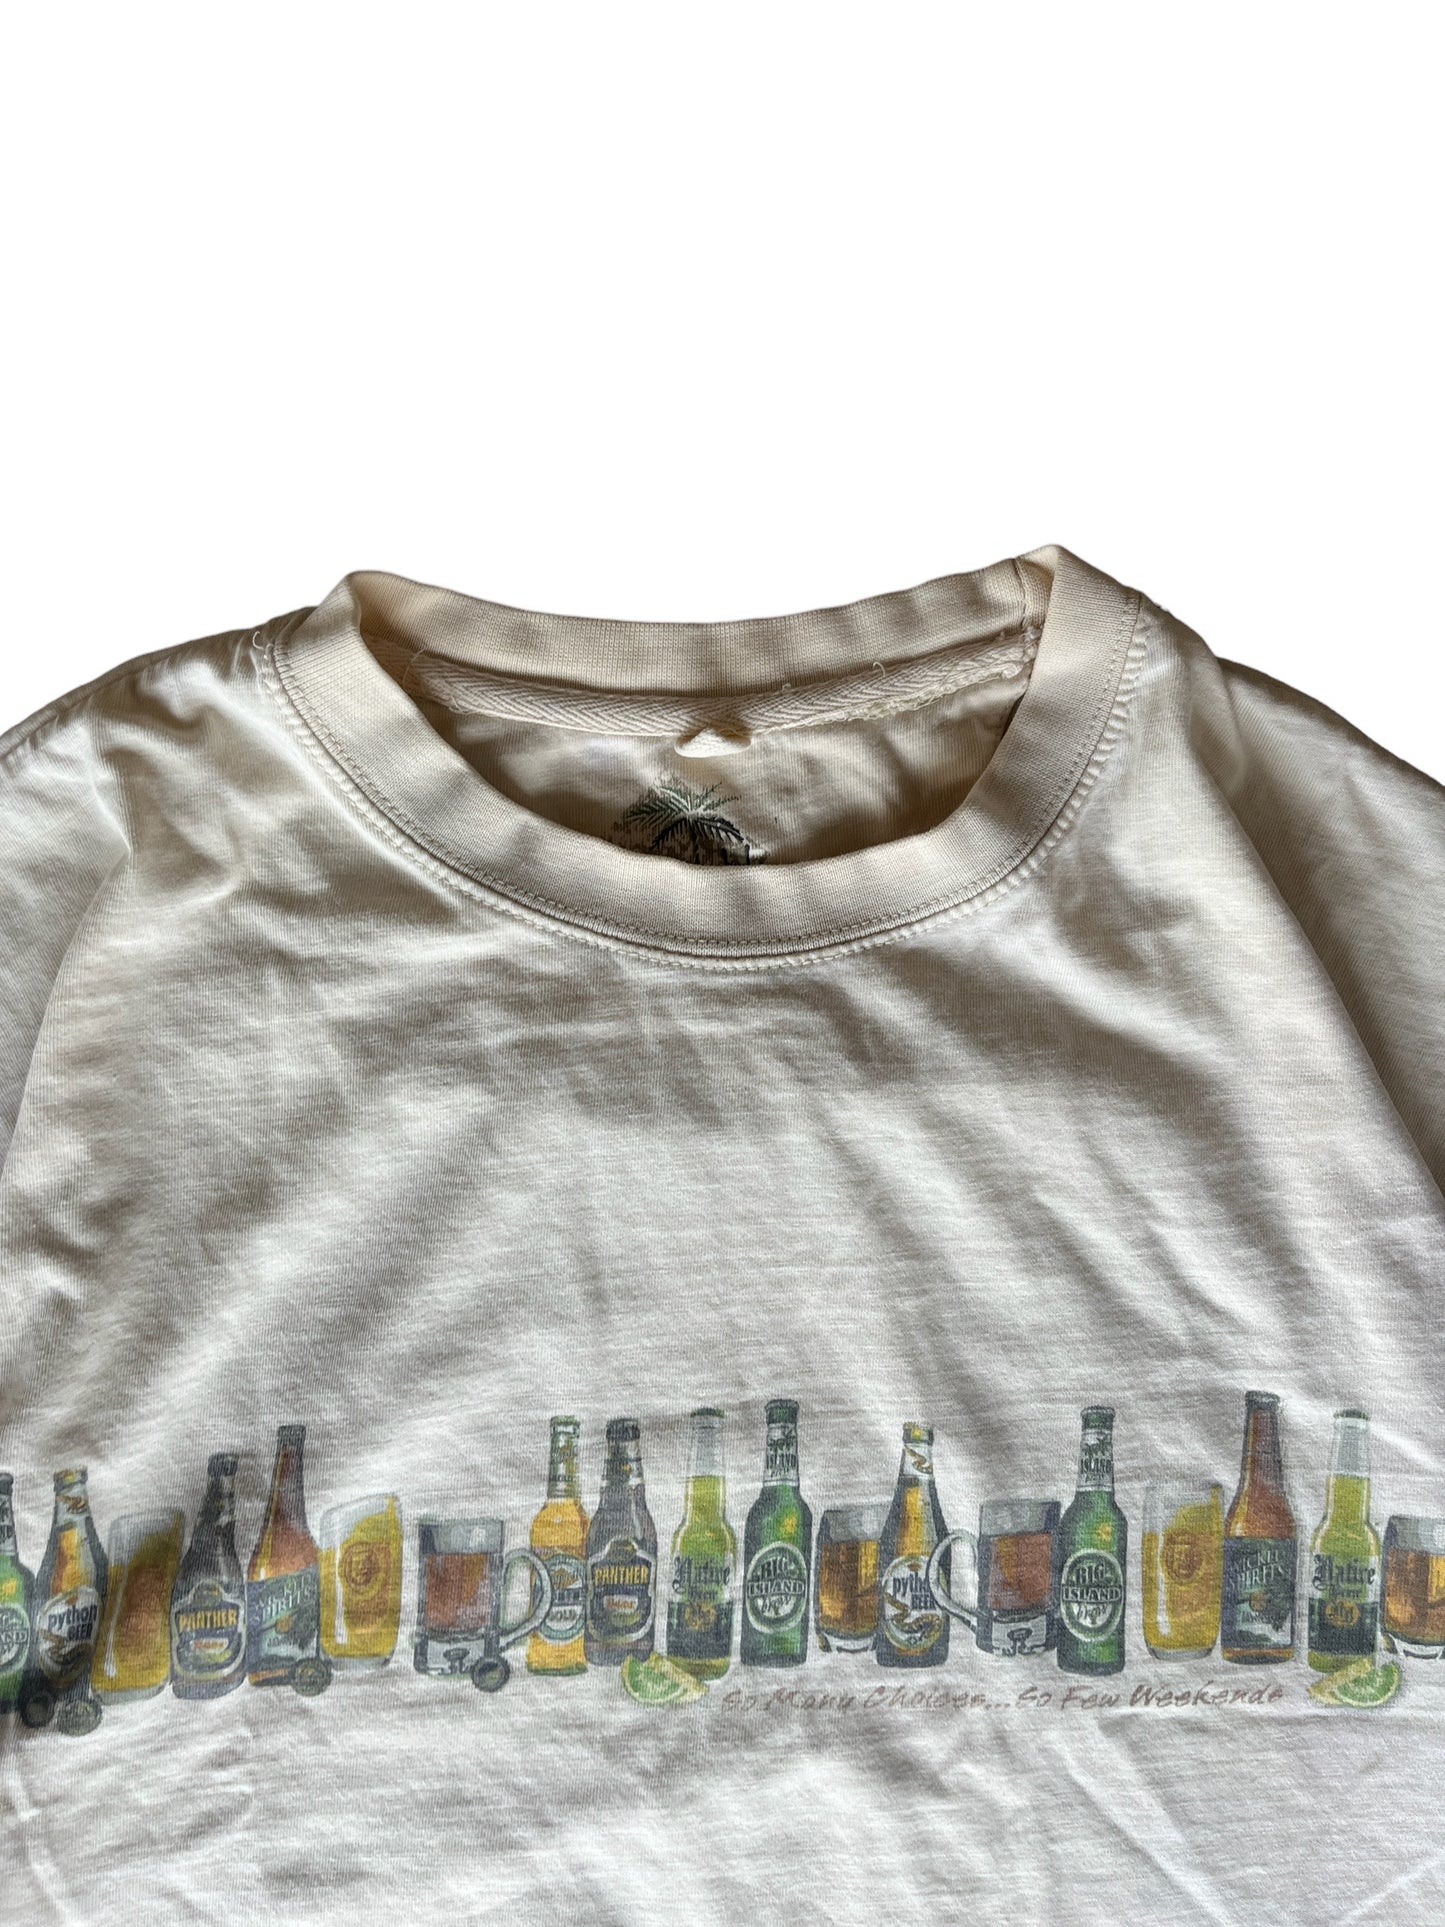 Vintage Beer "So Many Choices So Few Weekends" Tee